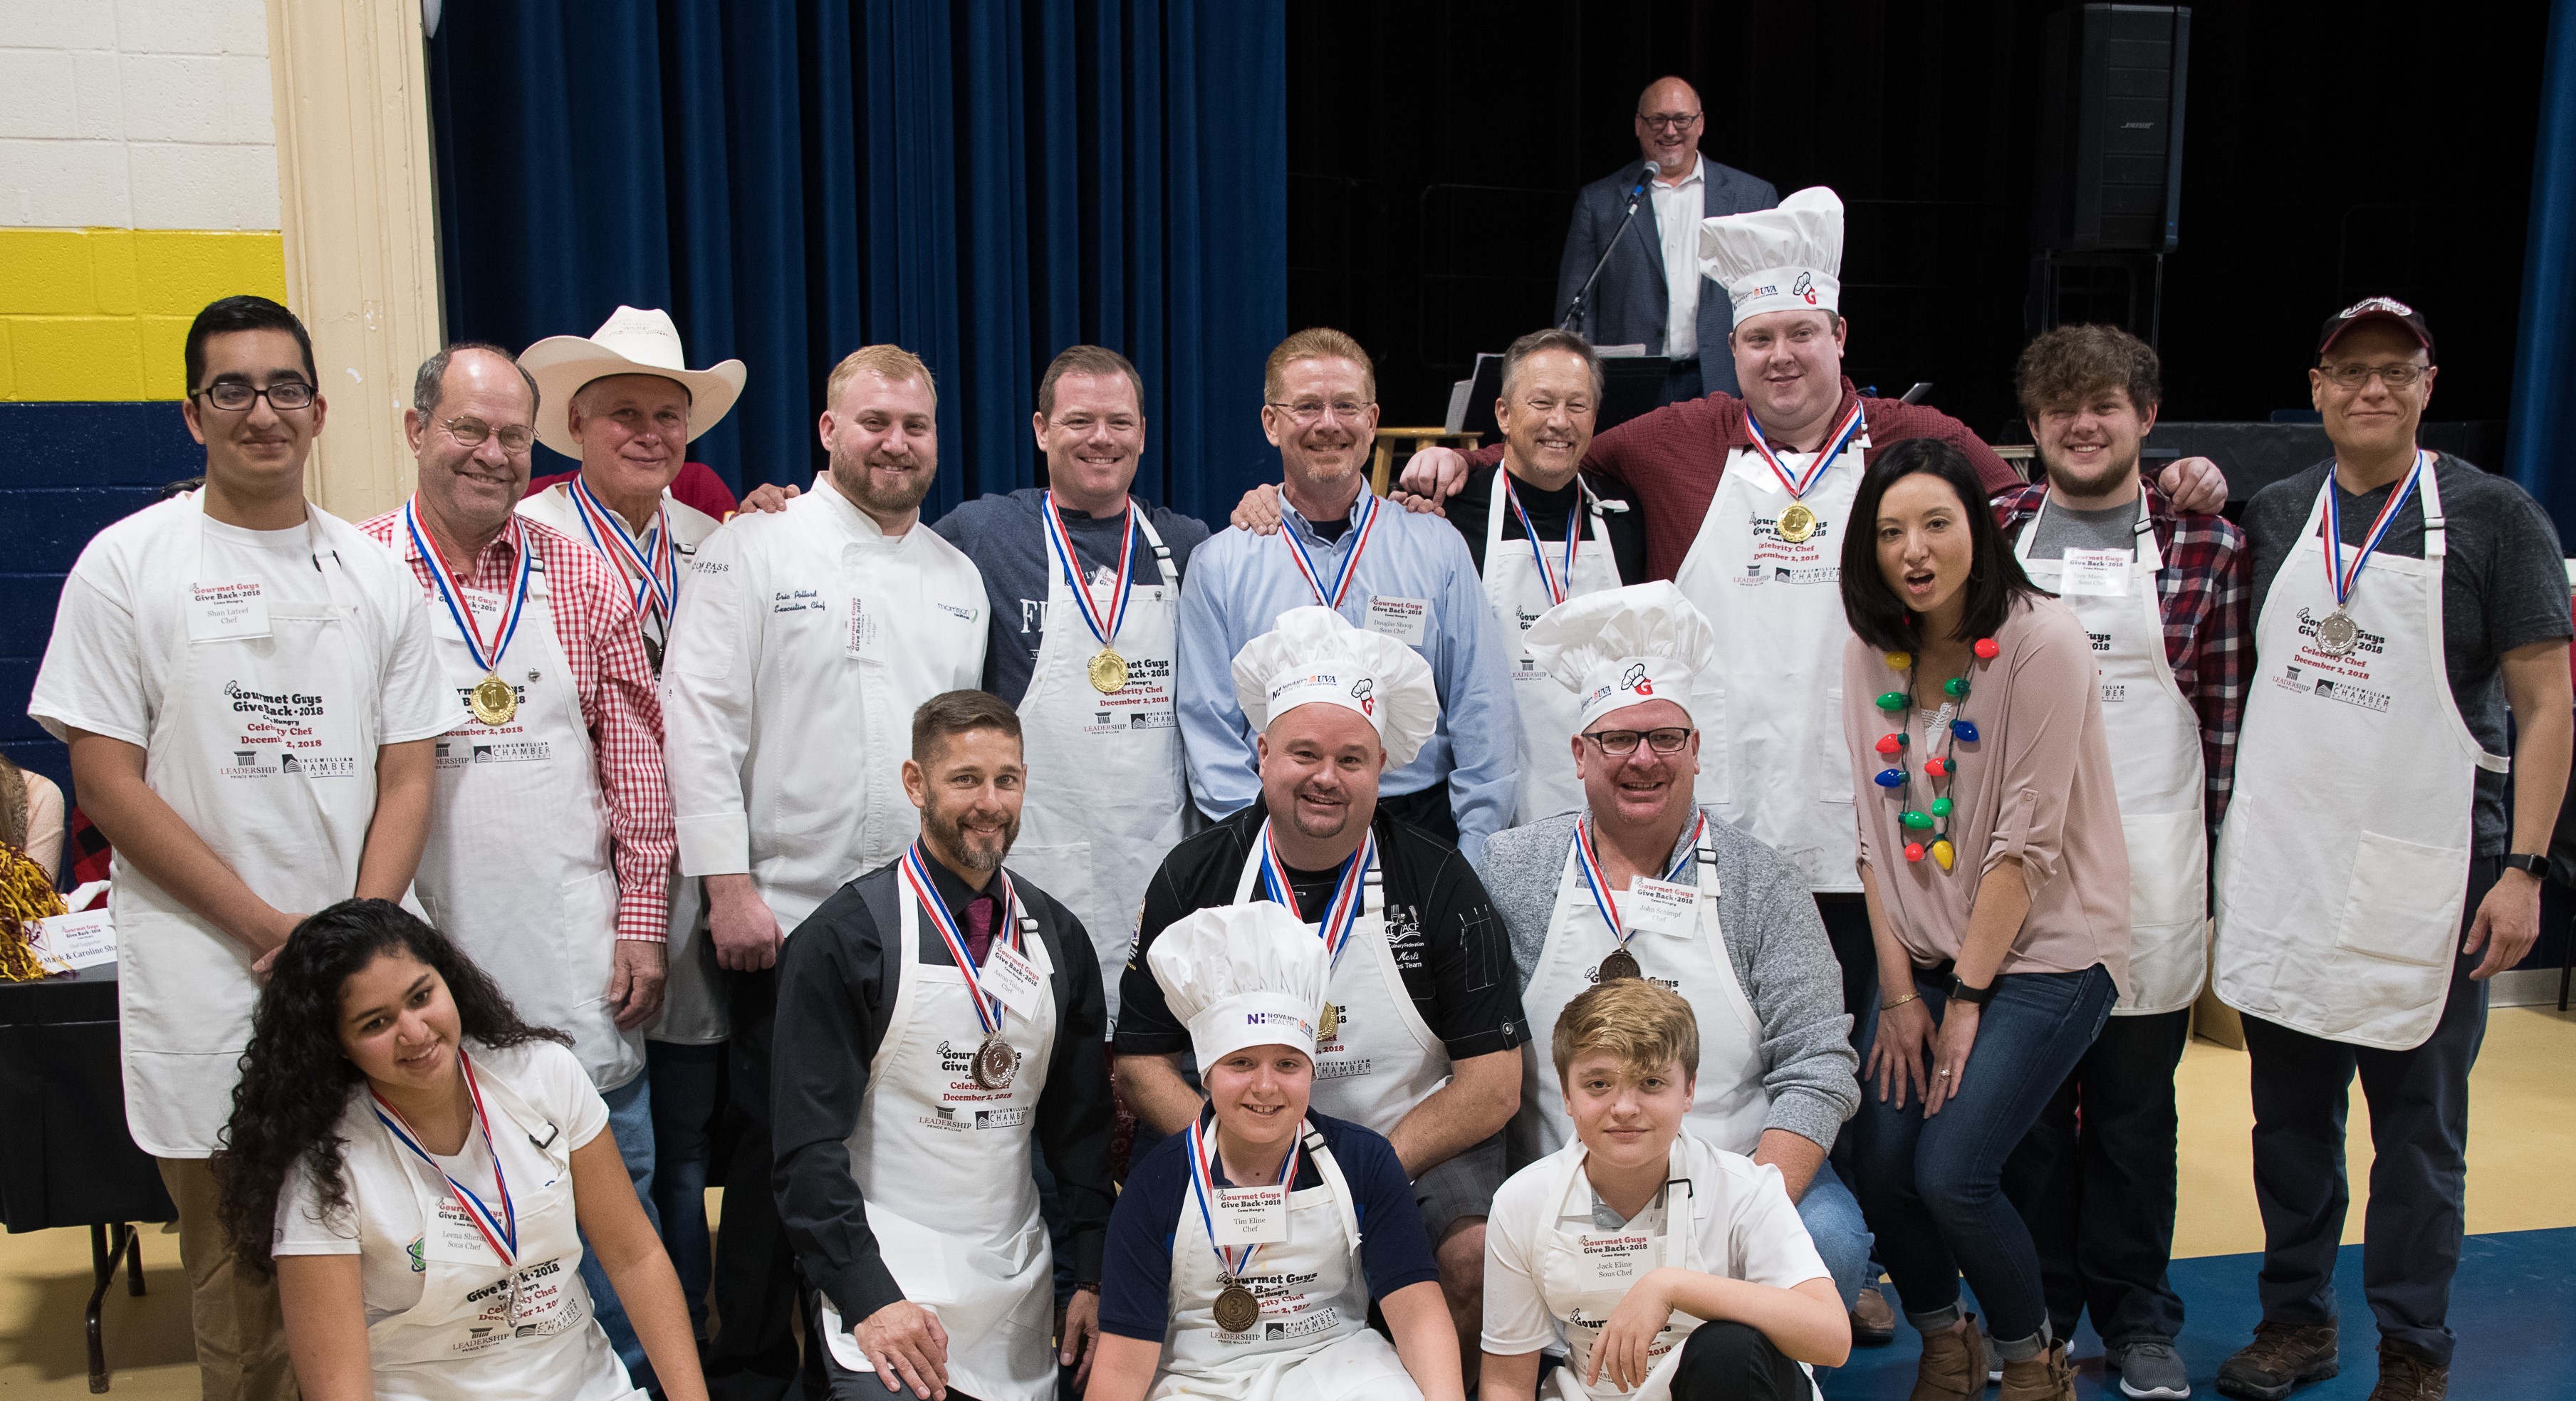 Amateur Cooking Competition to Feature Local Leaders Prince William